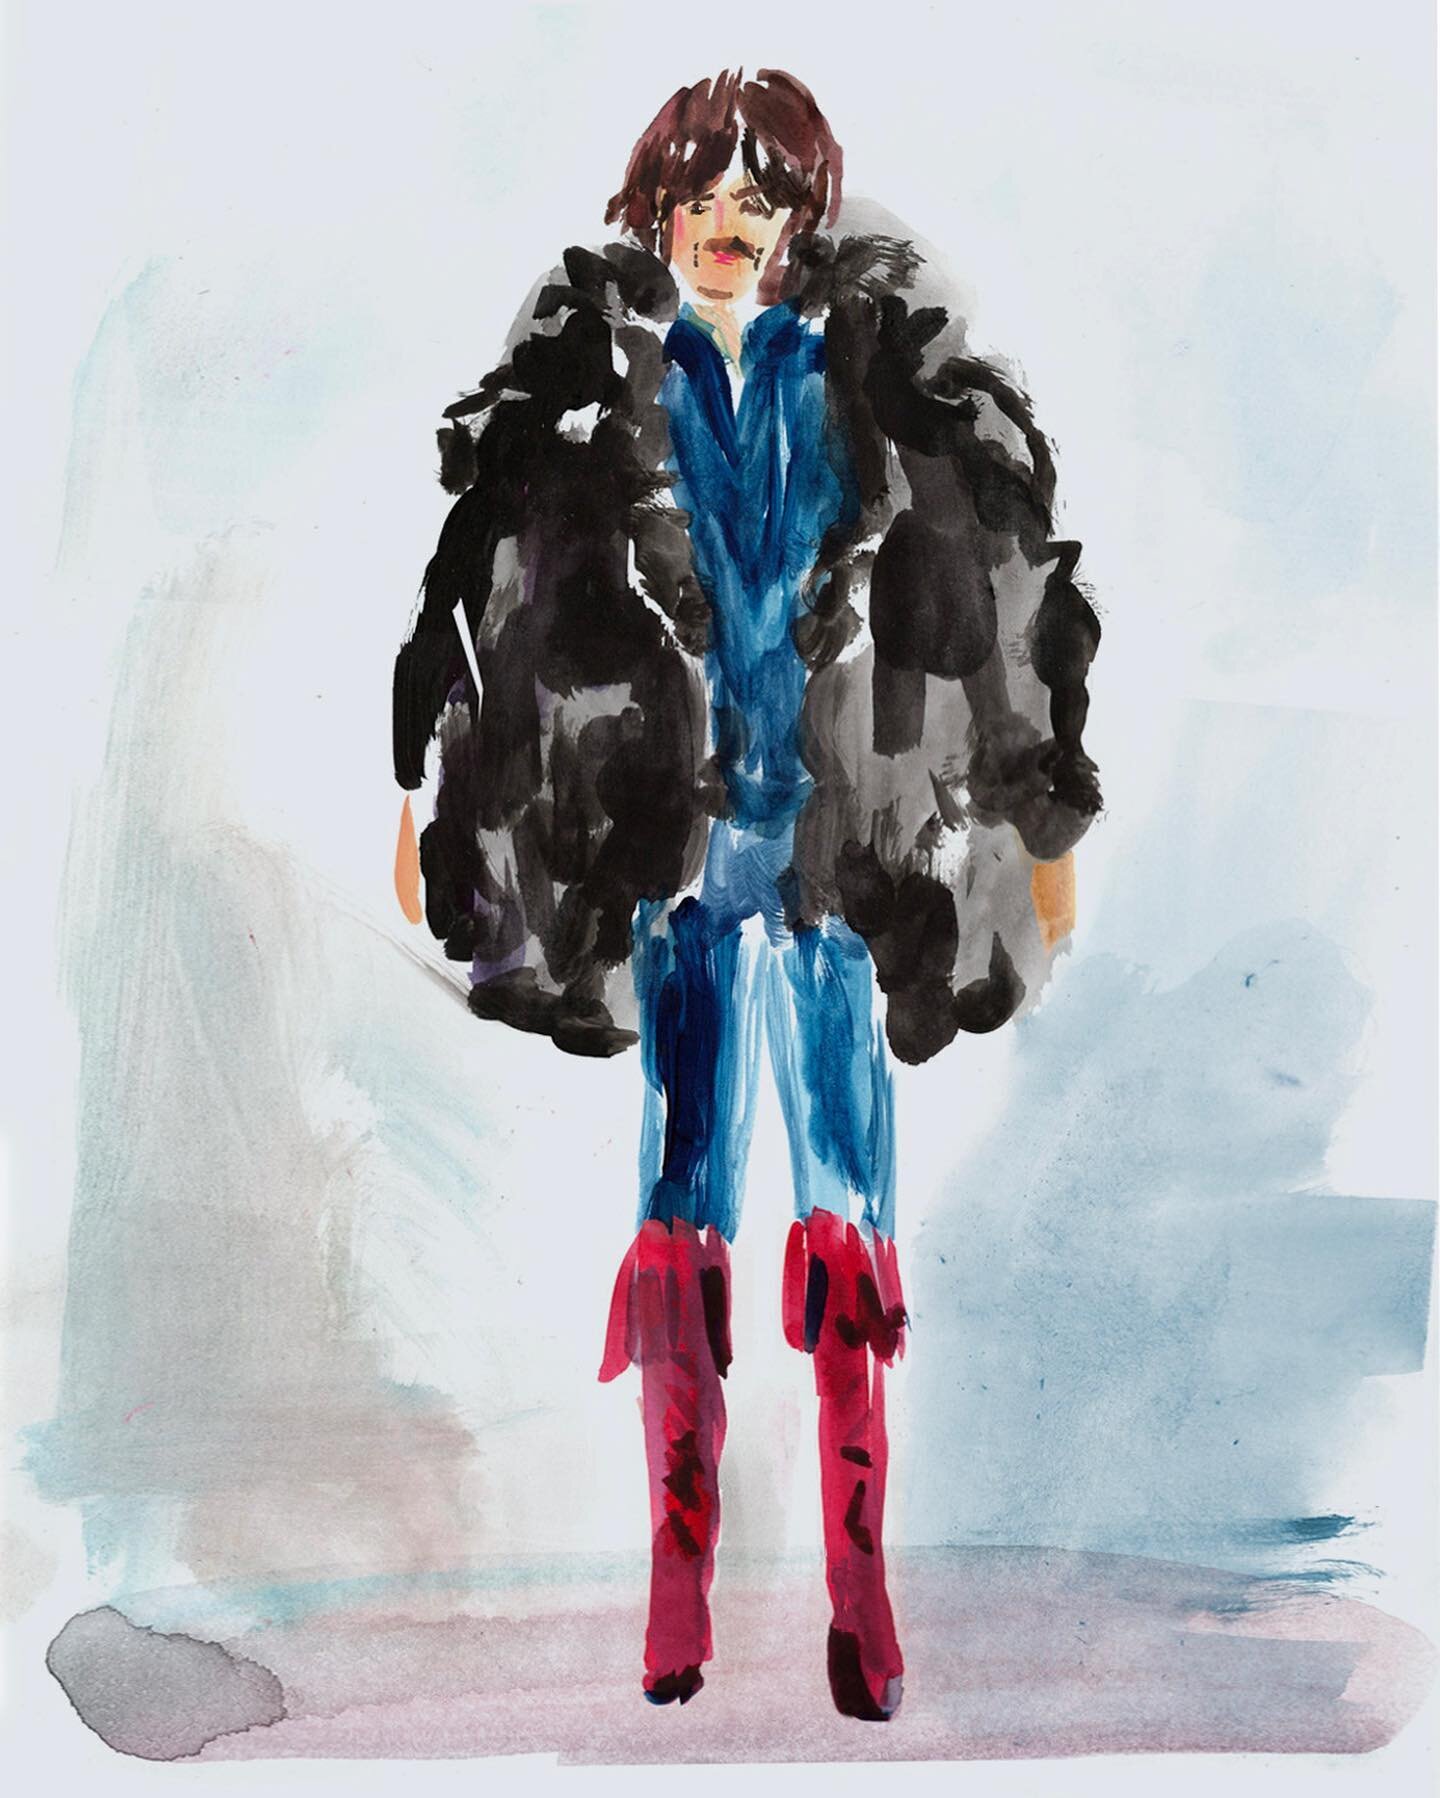 The yeti coat + boots combo of George Harrison in #GetBack